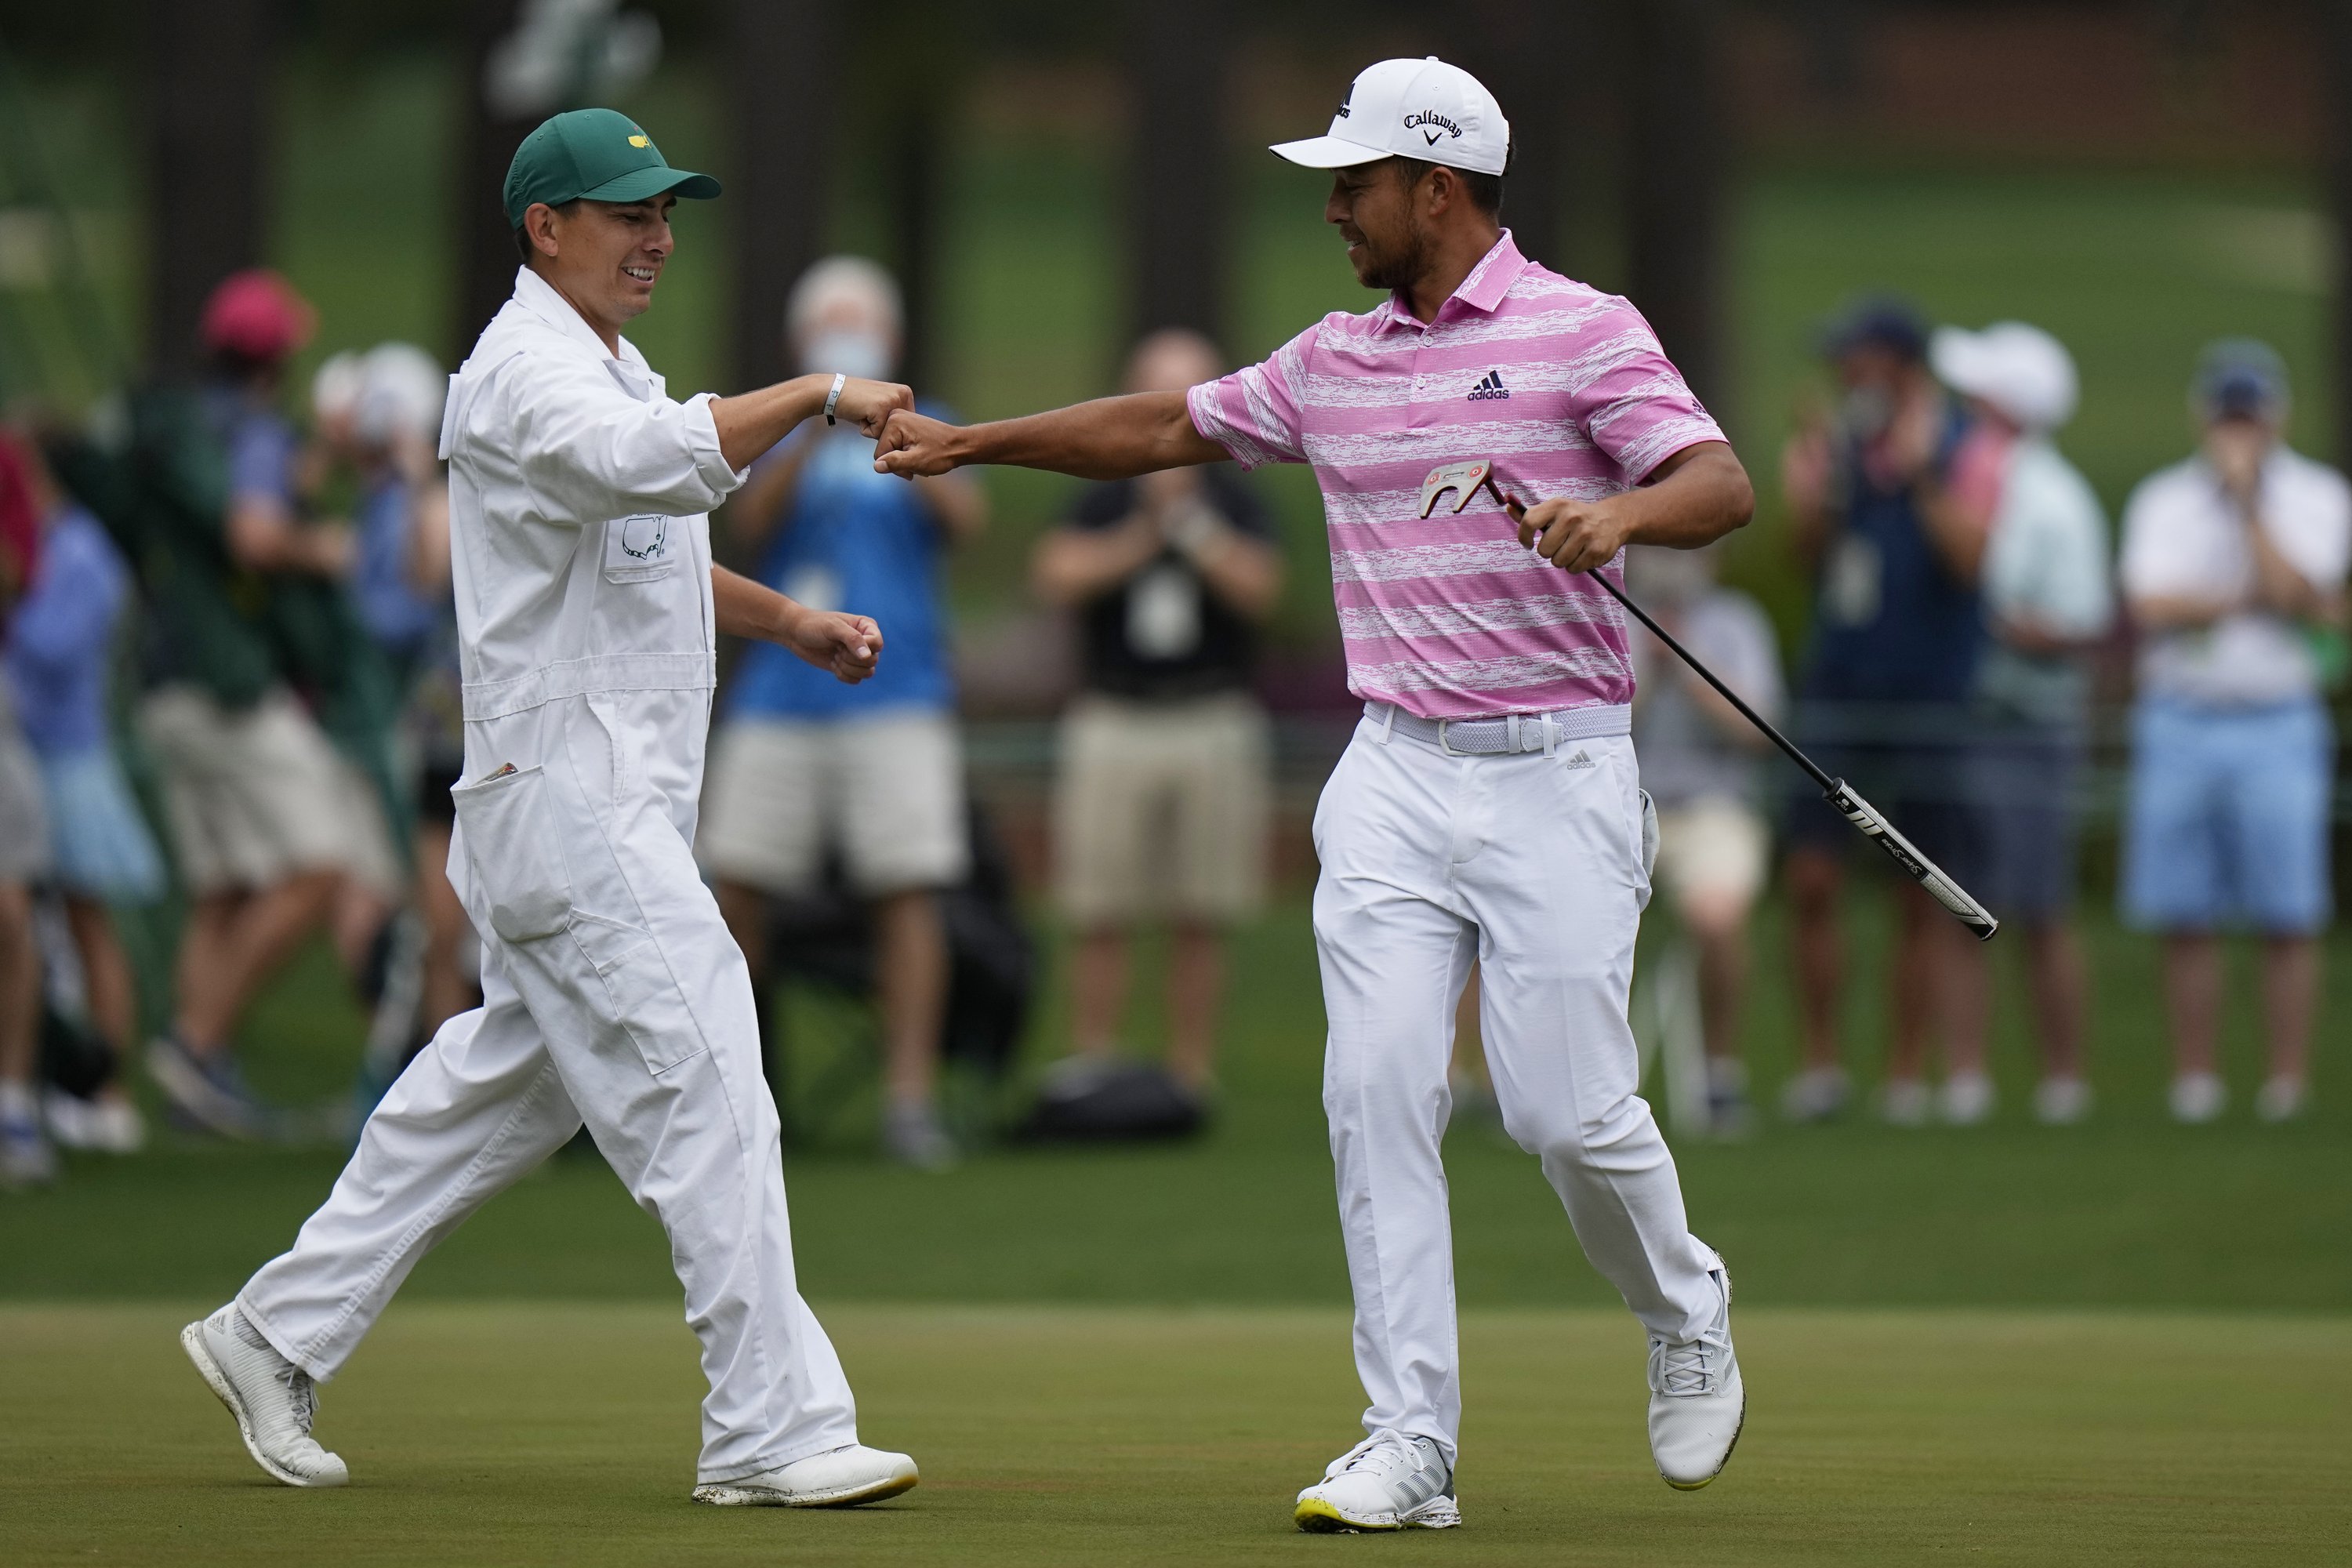 Xander Schauffele, again, right in major mix at Masters AP News